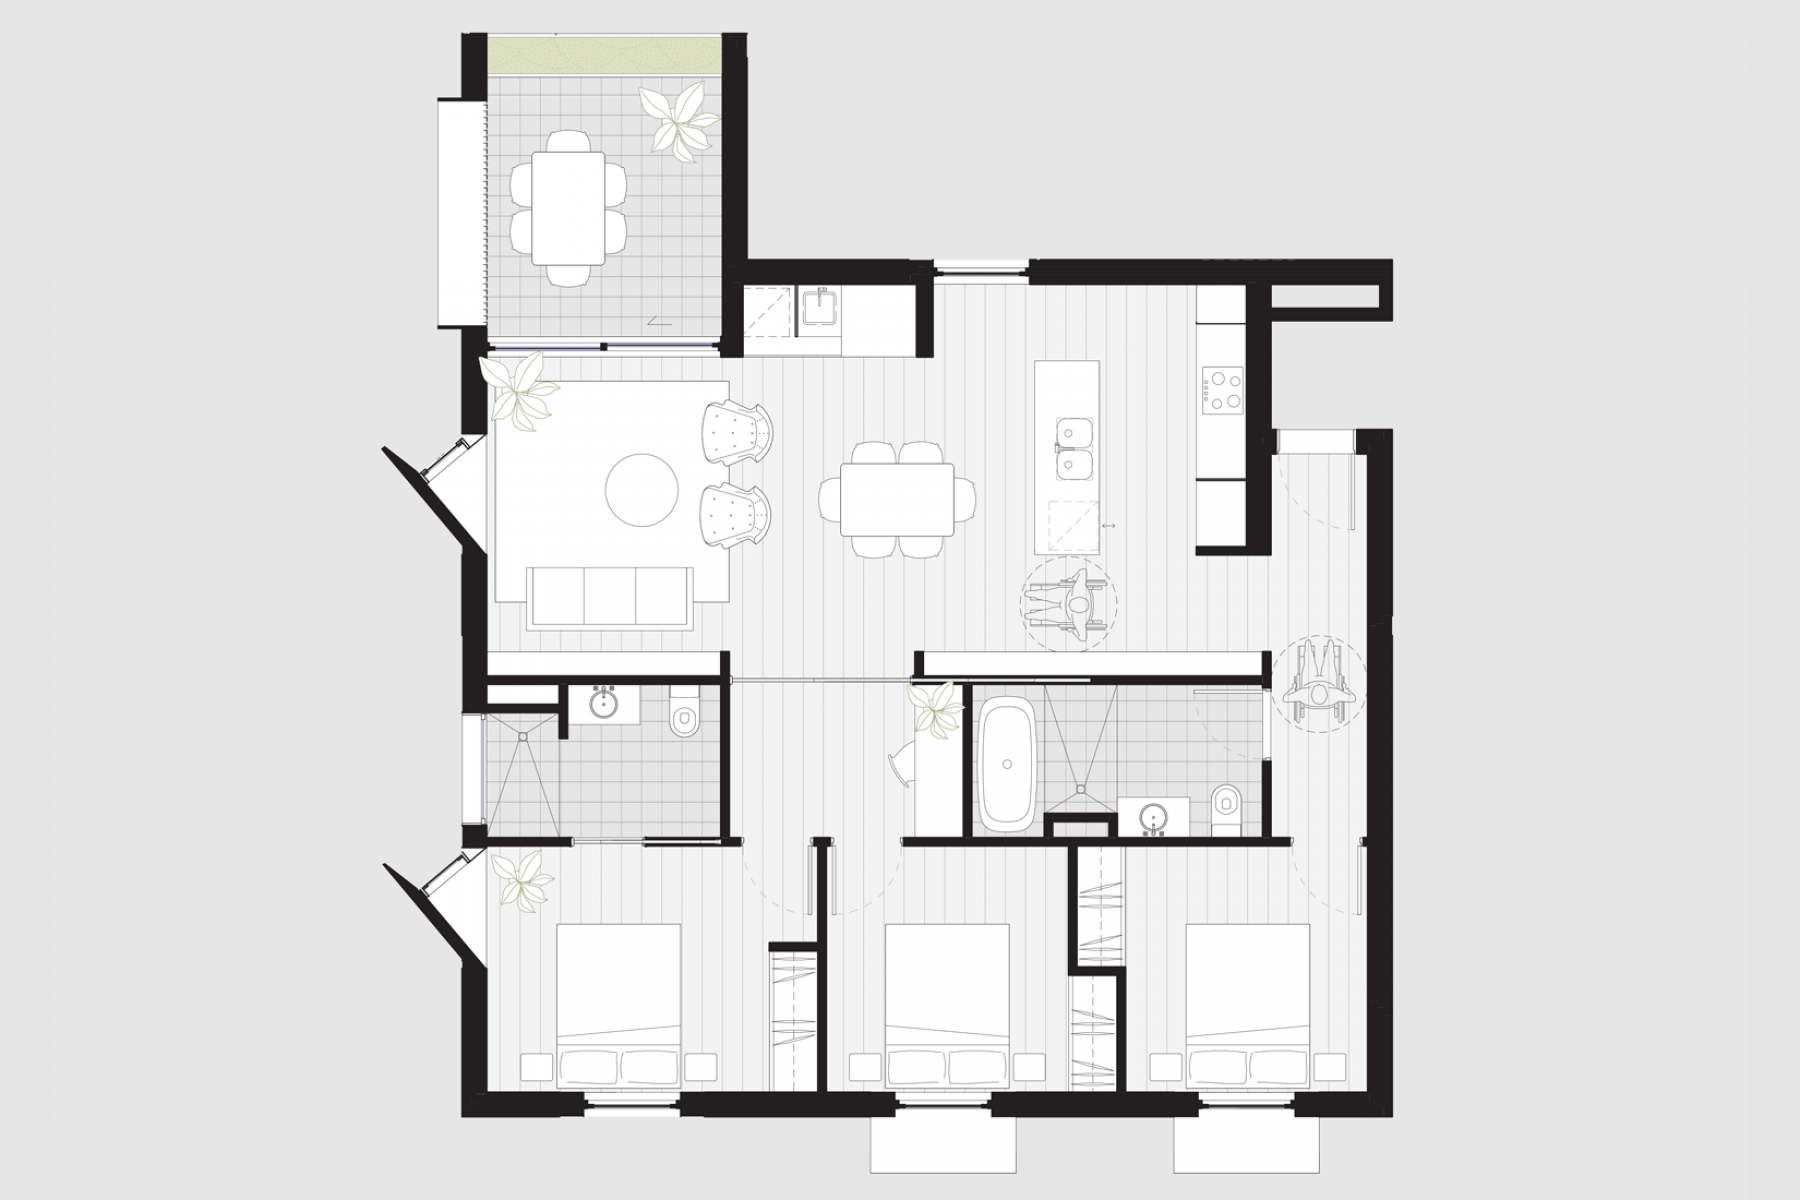 Apartment floorplan by Design Strategy Architecture